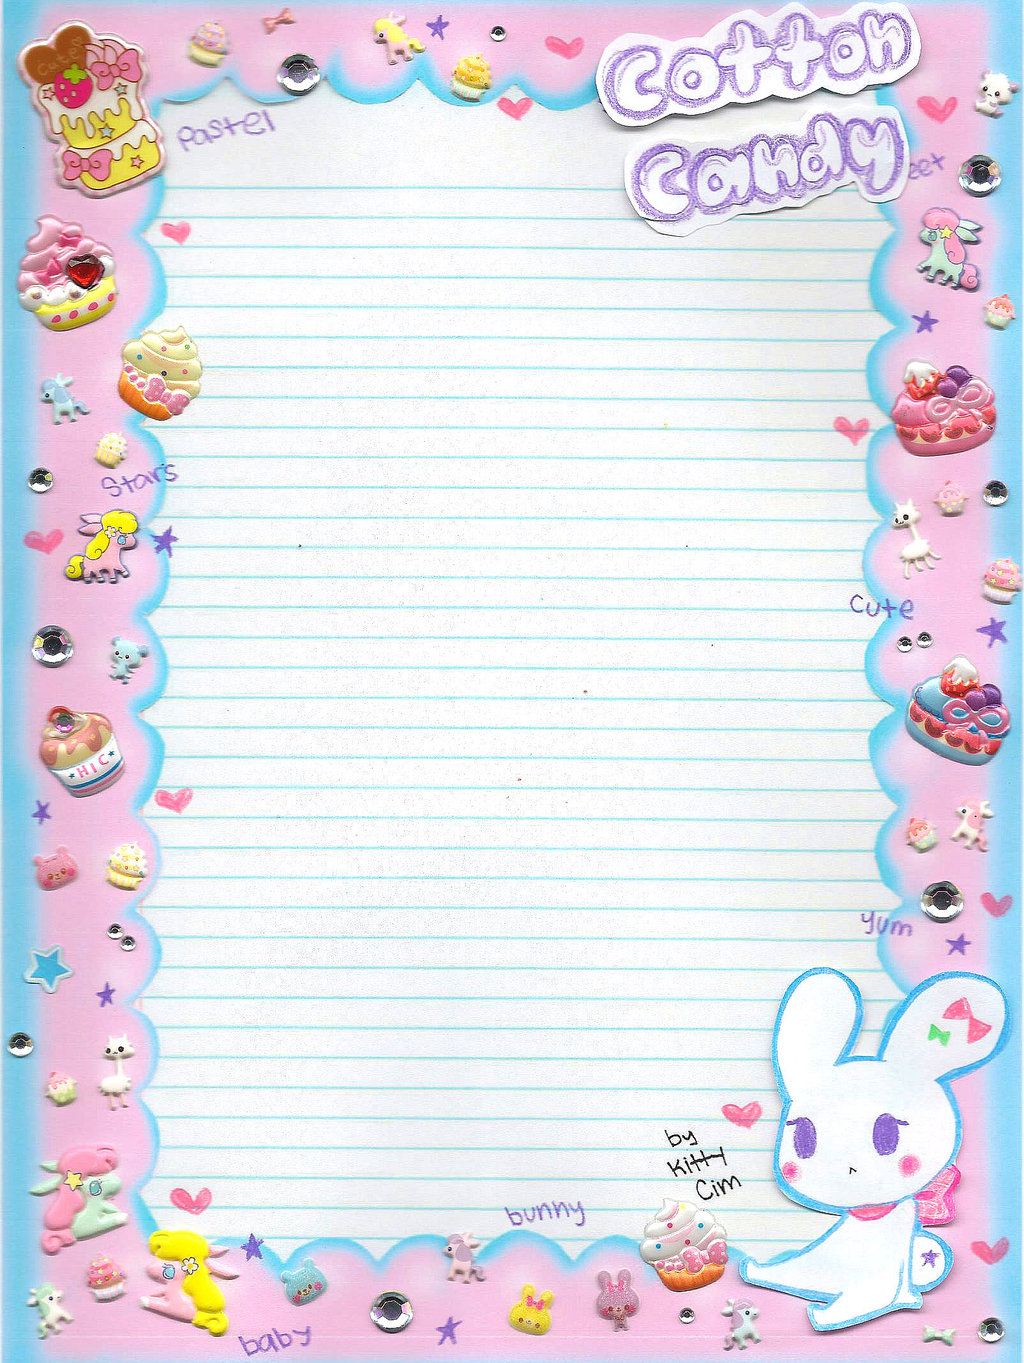 Cotton Candy notebook paper~ by TheUndertakersKitty on DeviantArt